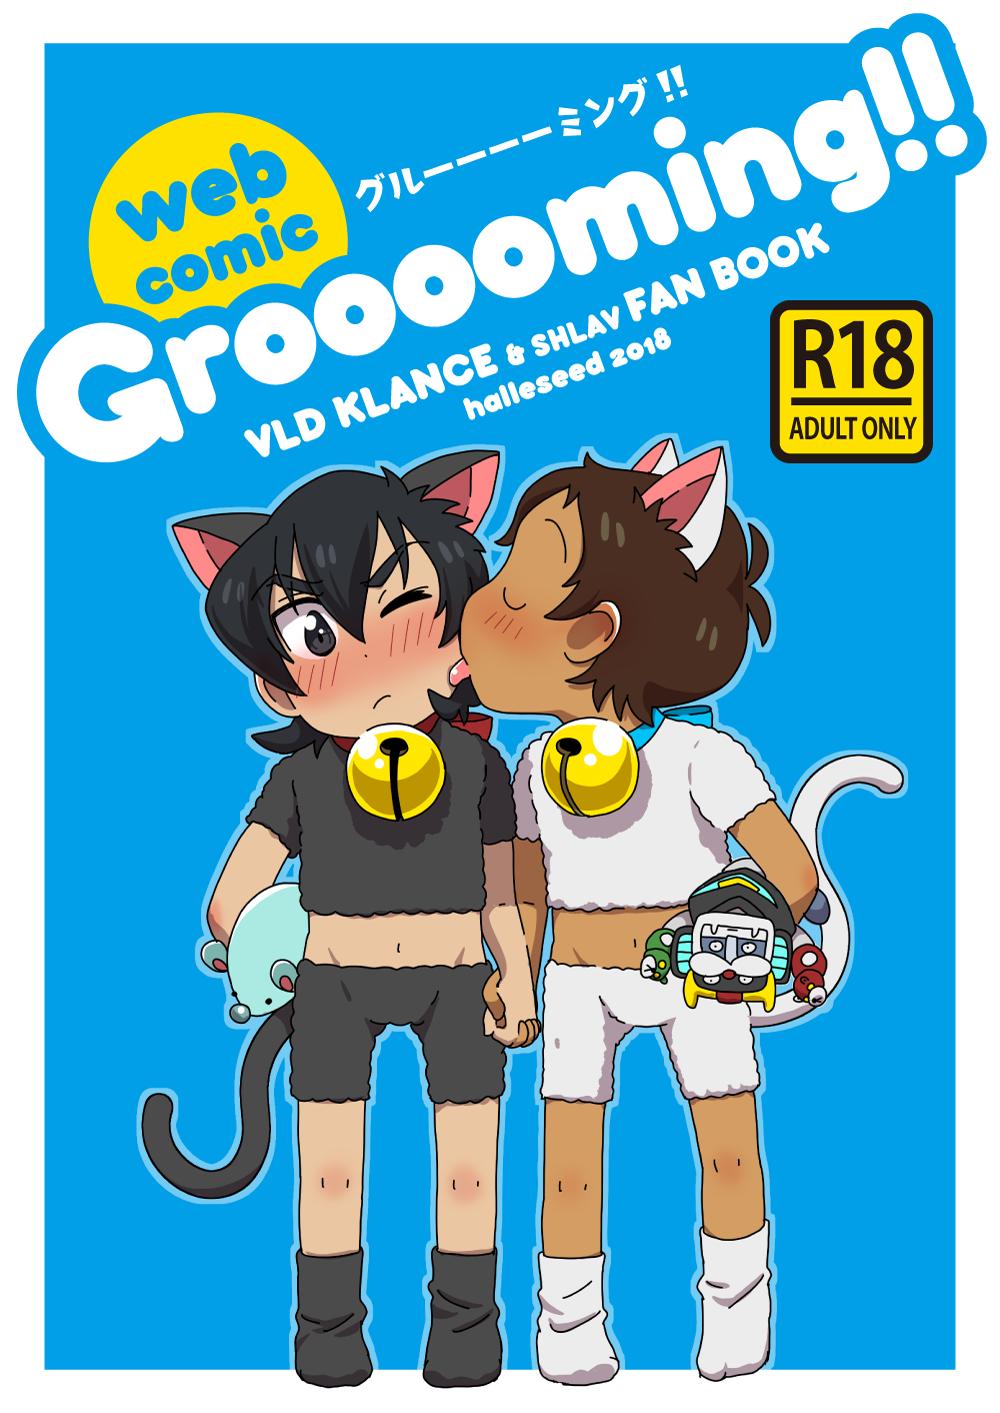 Spooning グルーーーーミング！ - Voltron Amateurs - Page 1